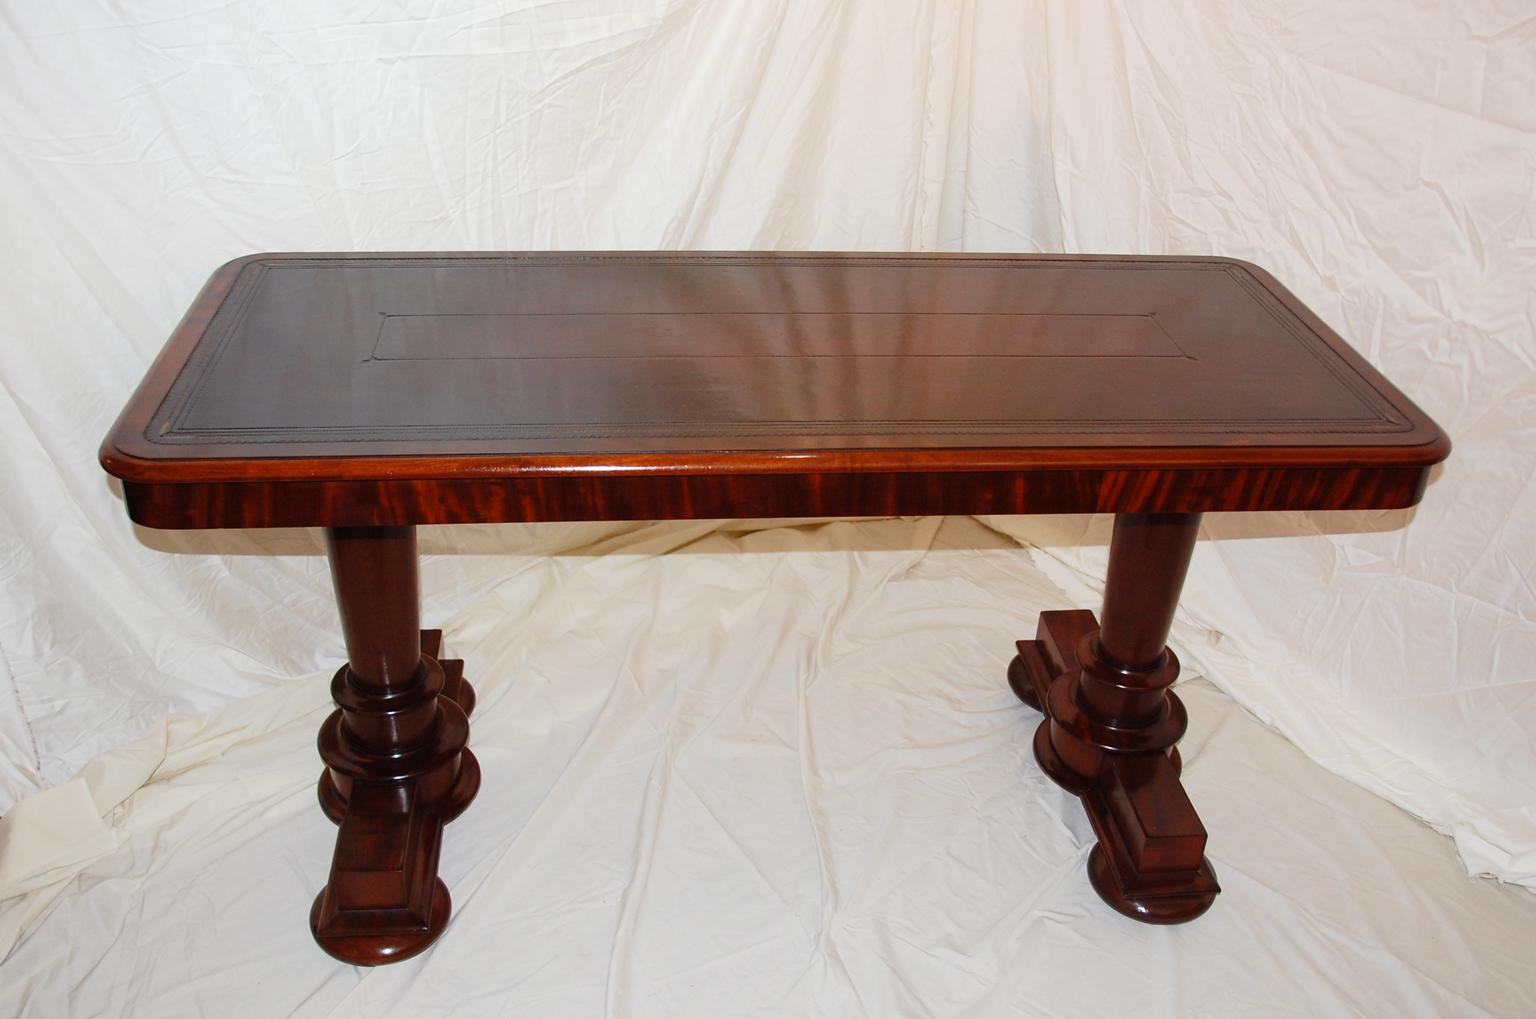 English Mid-19th Century Mahogany Writing, Library or Sofa Table Pedestal Ends In Good Condition For Sale In Wells, ME